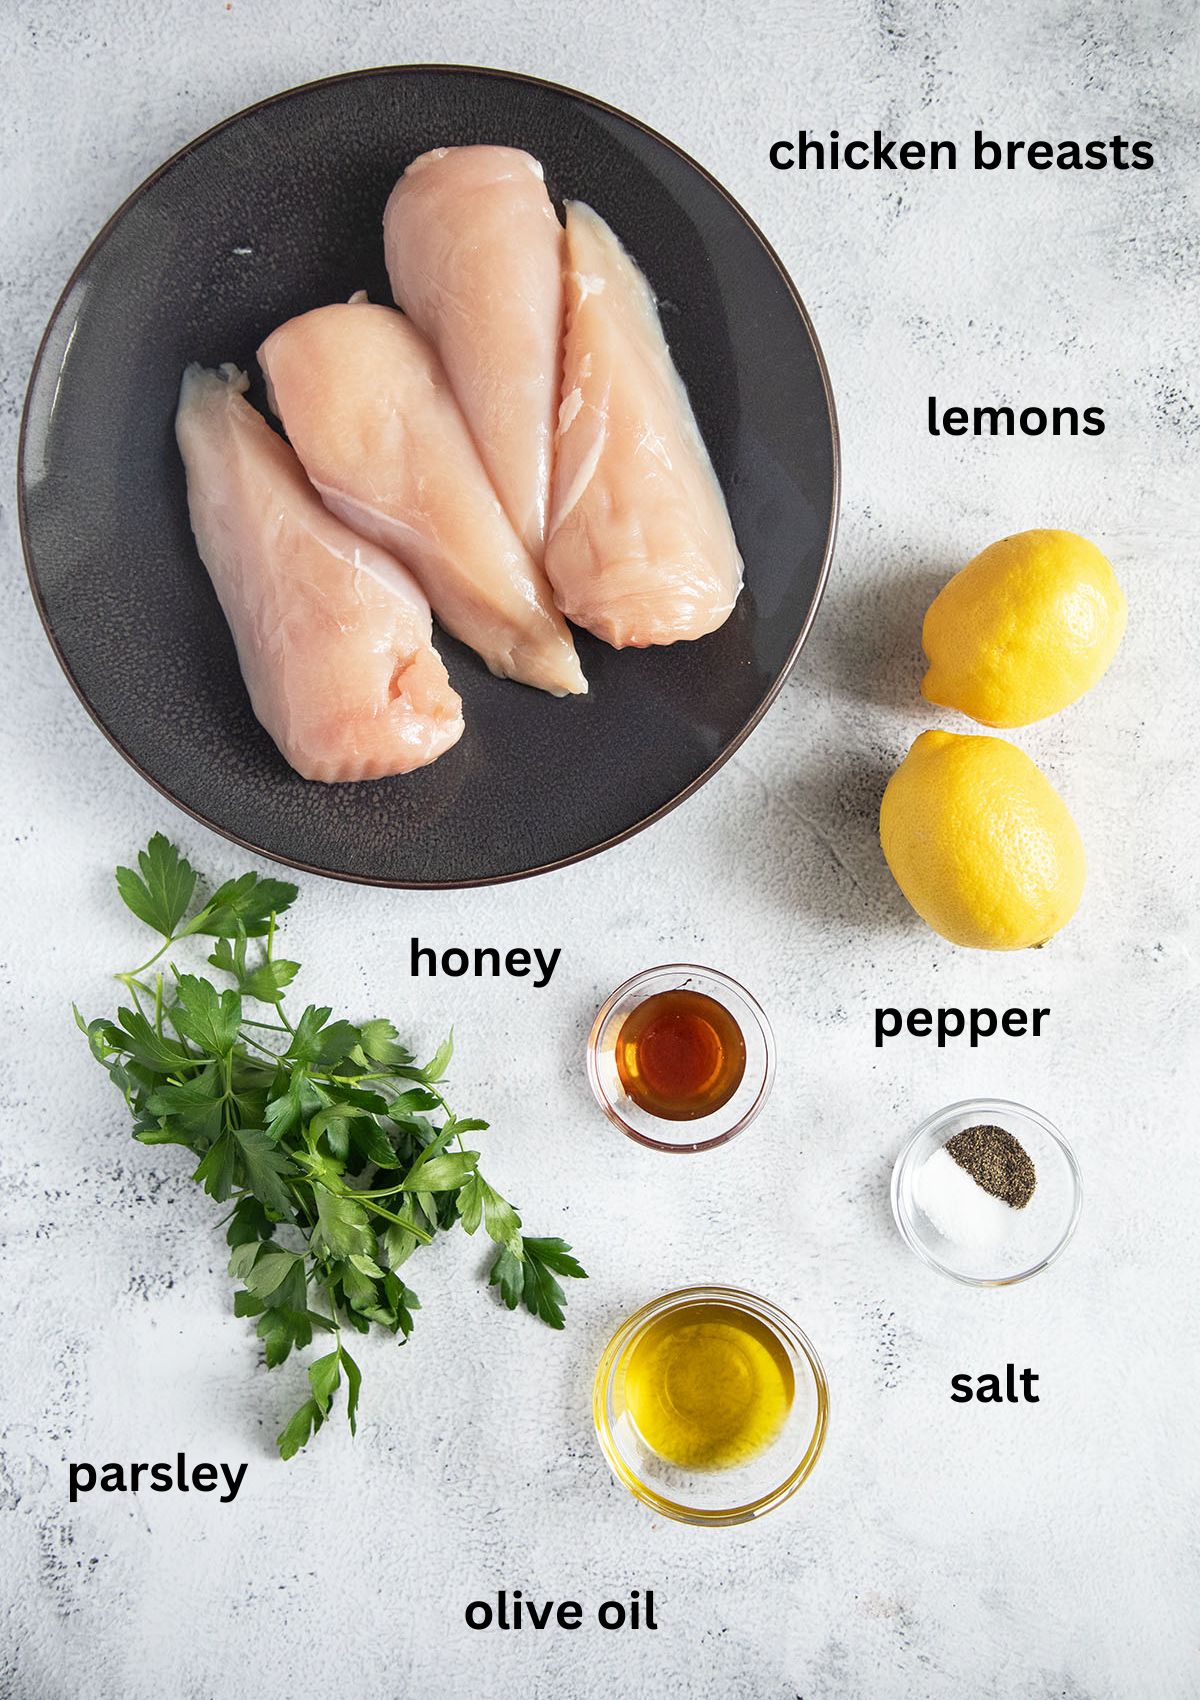 ingredients for cooking chicken breasts with parsley, lemons, honey and olive oil.